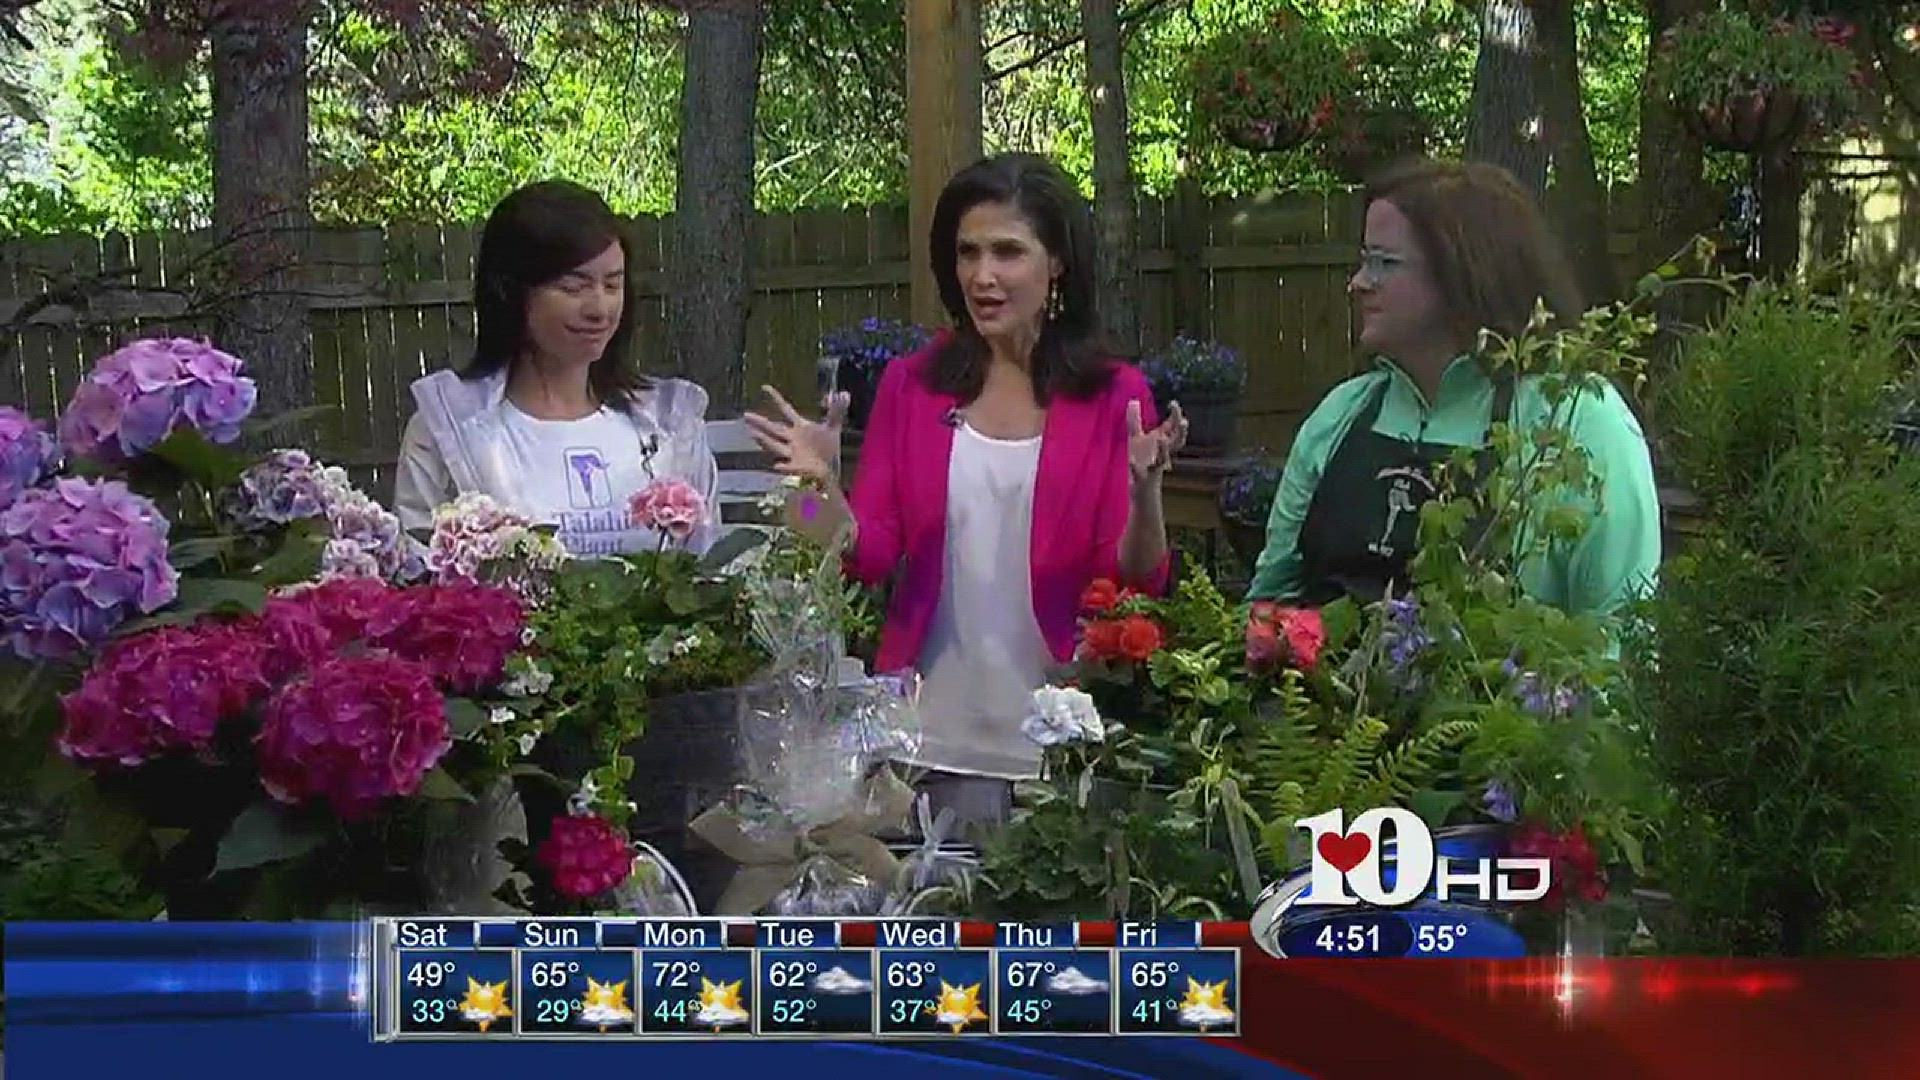 JoAnn Coakley and Mandy Welch join Beth to talk more about their annual plant sale that is happening on April 9 at Lakeshore Park, 9 a.m. to 2 p.m.